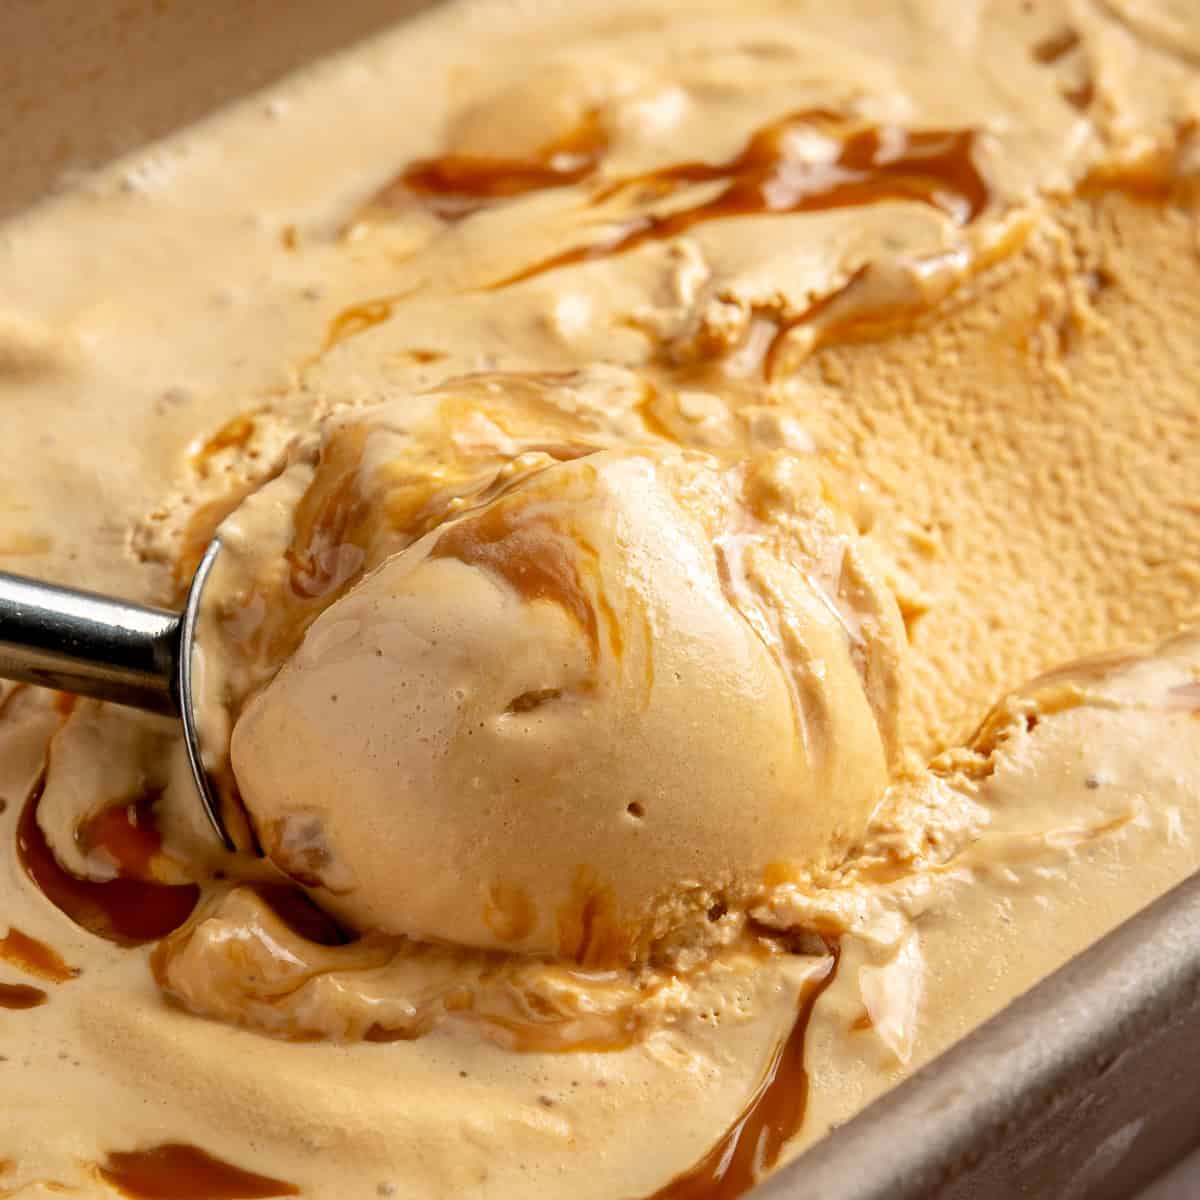 Ice cream scoop spooning up Dulce de leche ice cream with caramel drizzle.